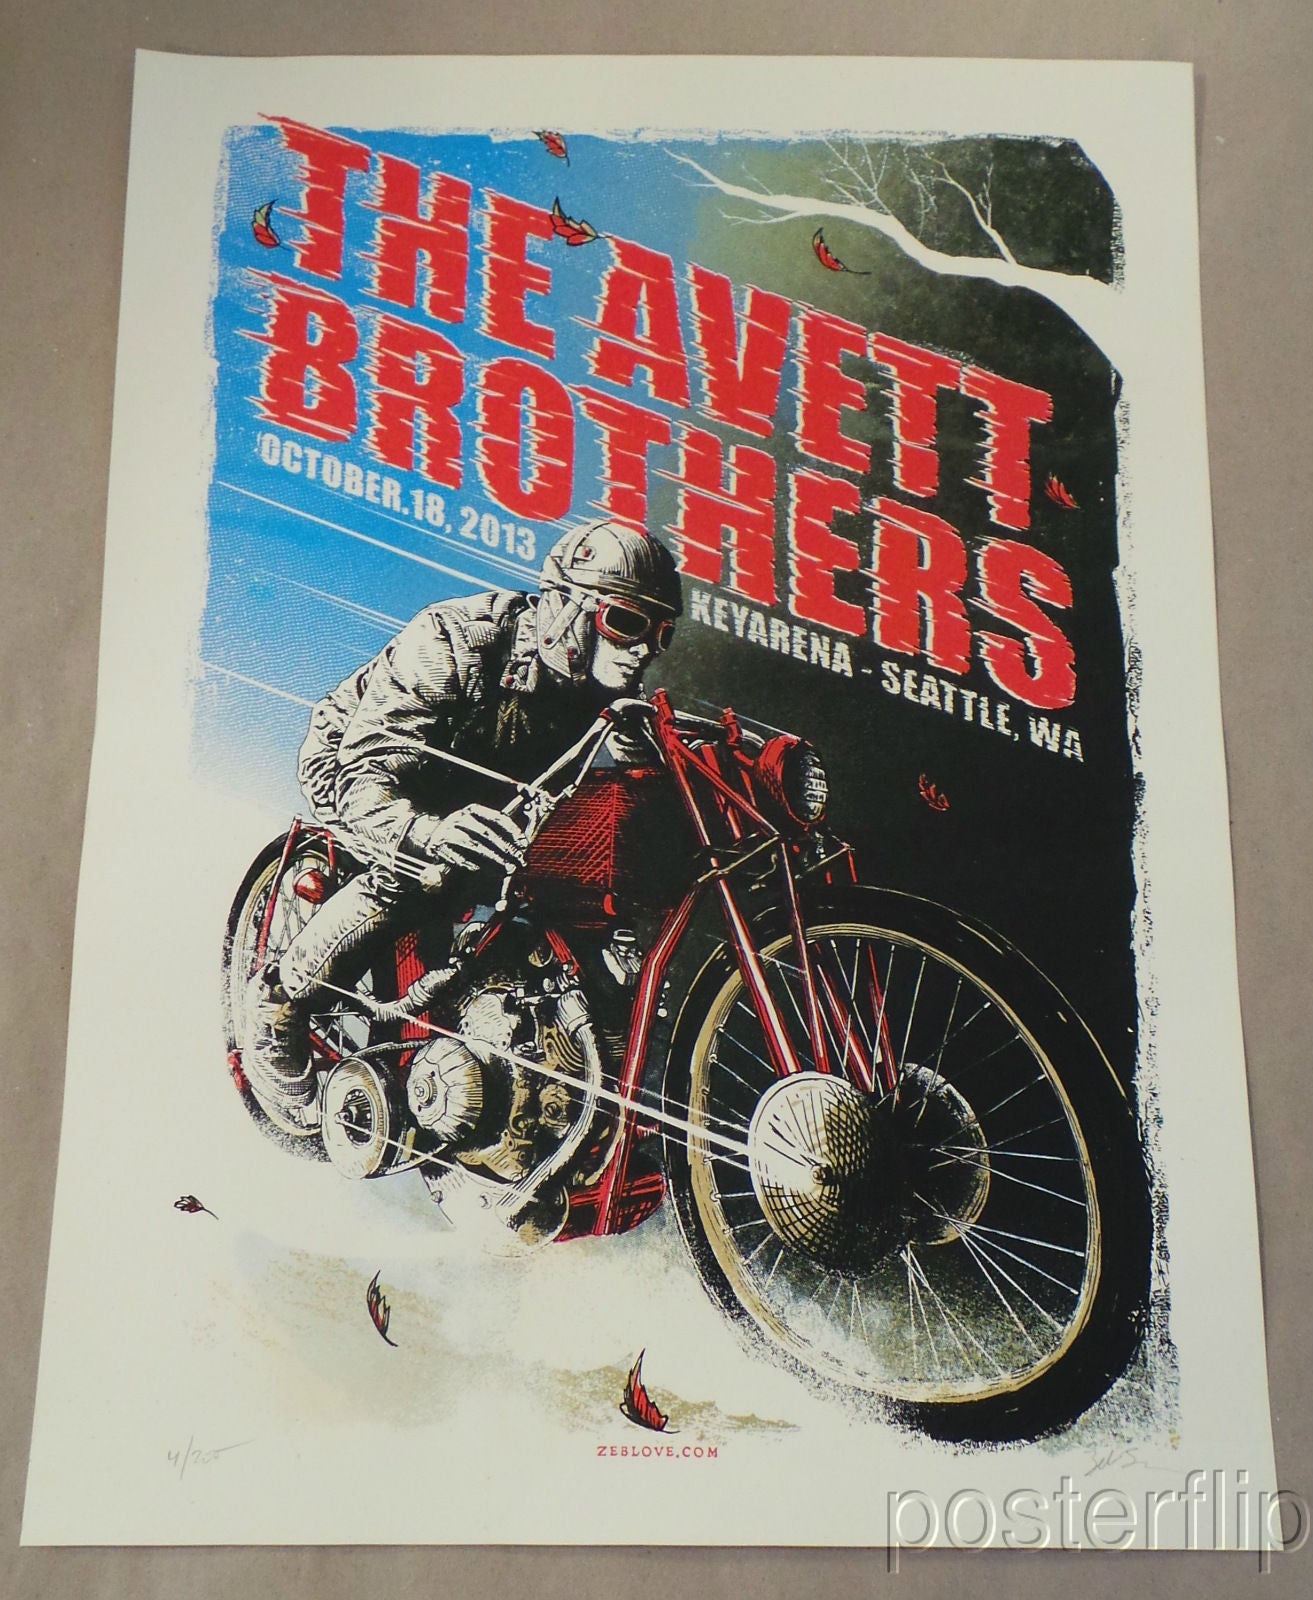 "The Avett Brothers (Seattle 2013)" by Zeb Love.  Created for the band's 10/18/13 show at the KeyArena in Seattle, WA.